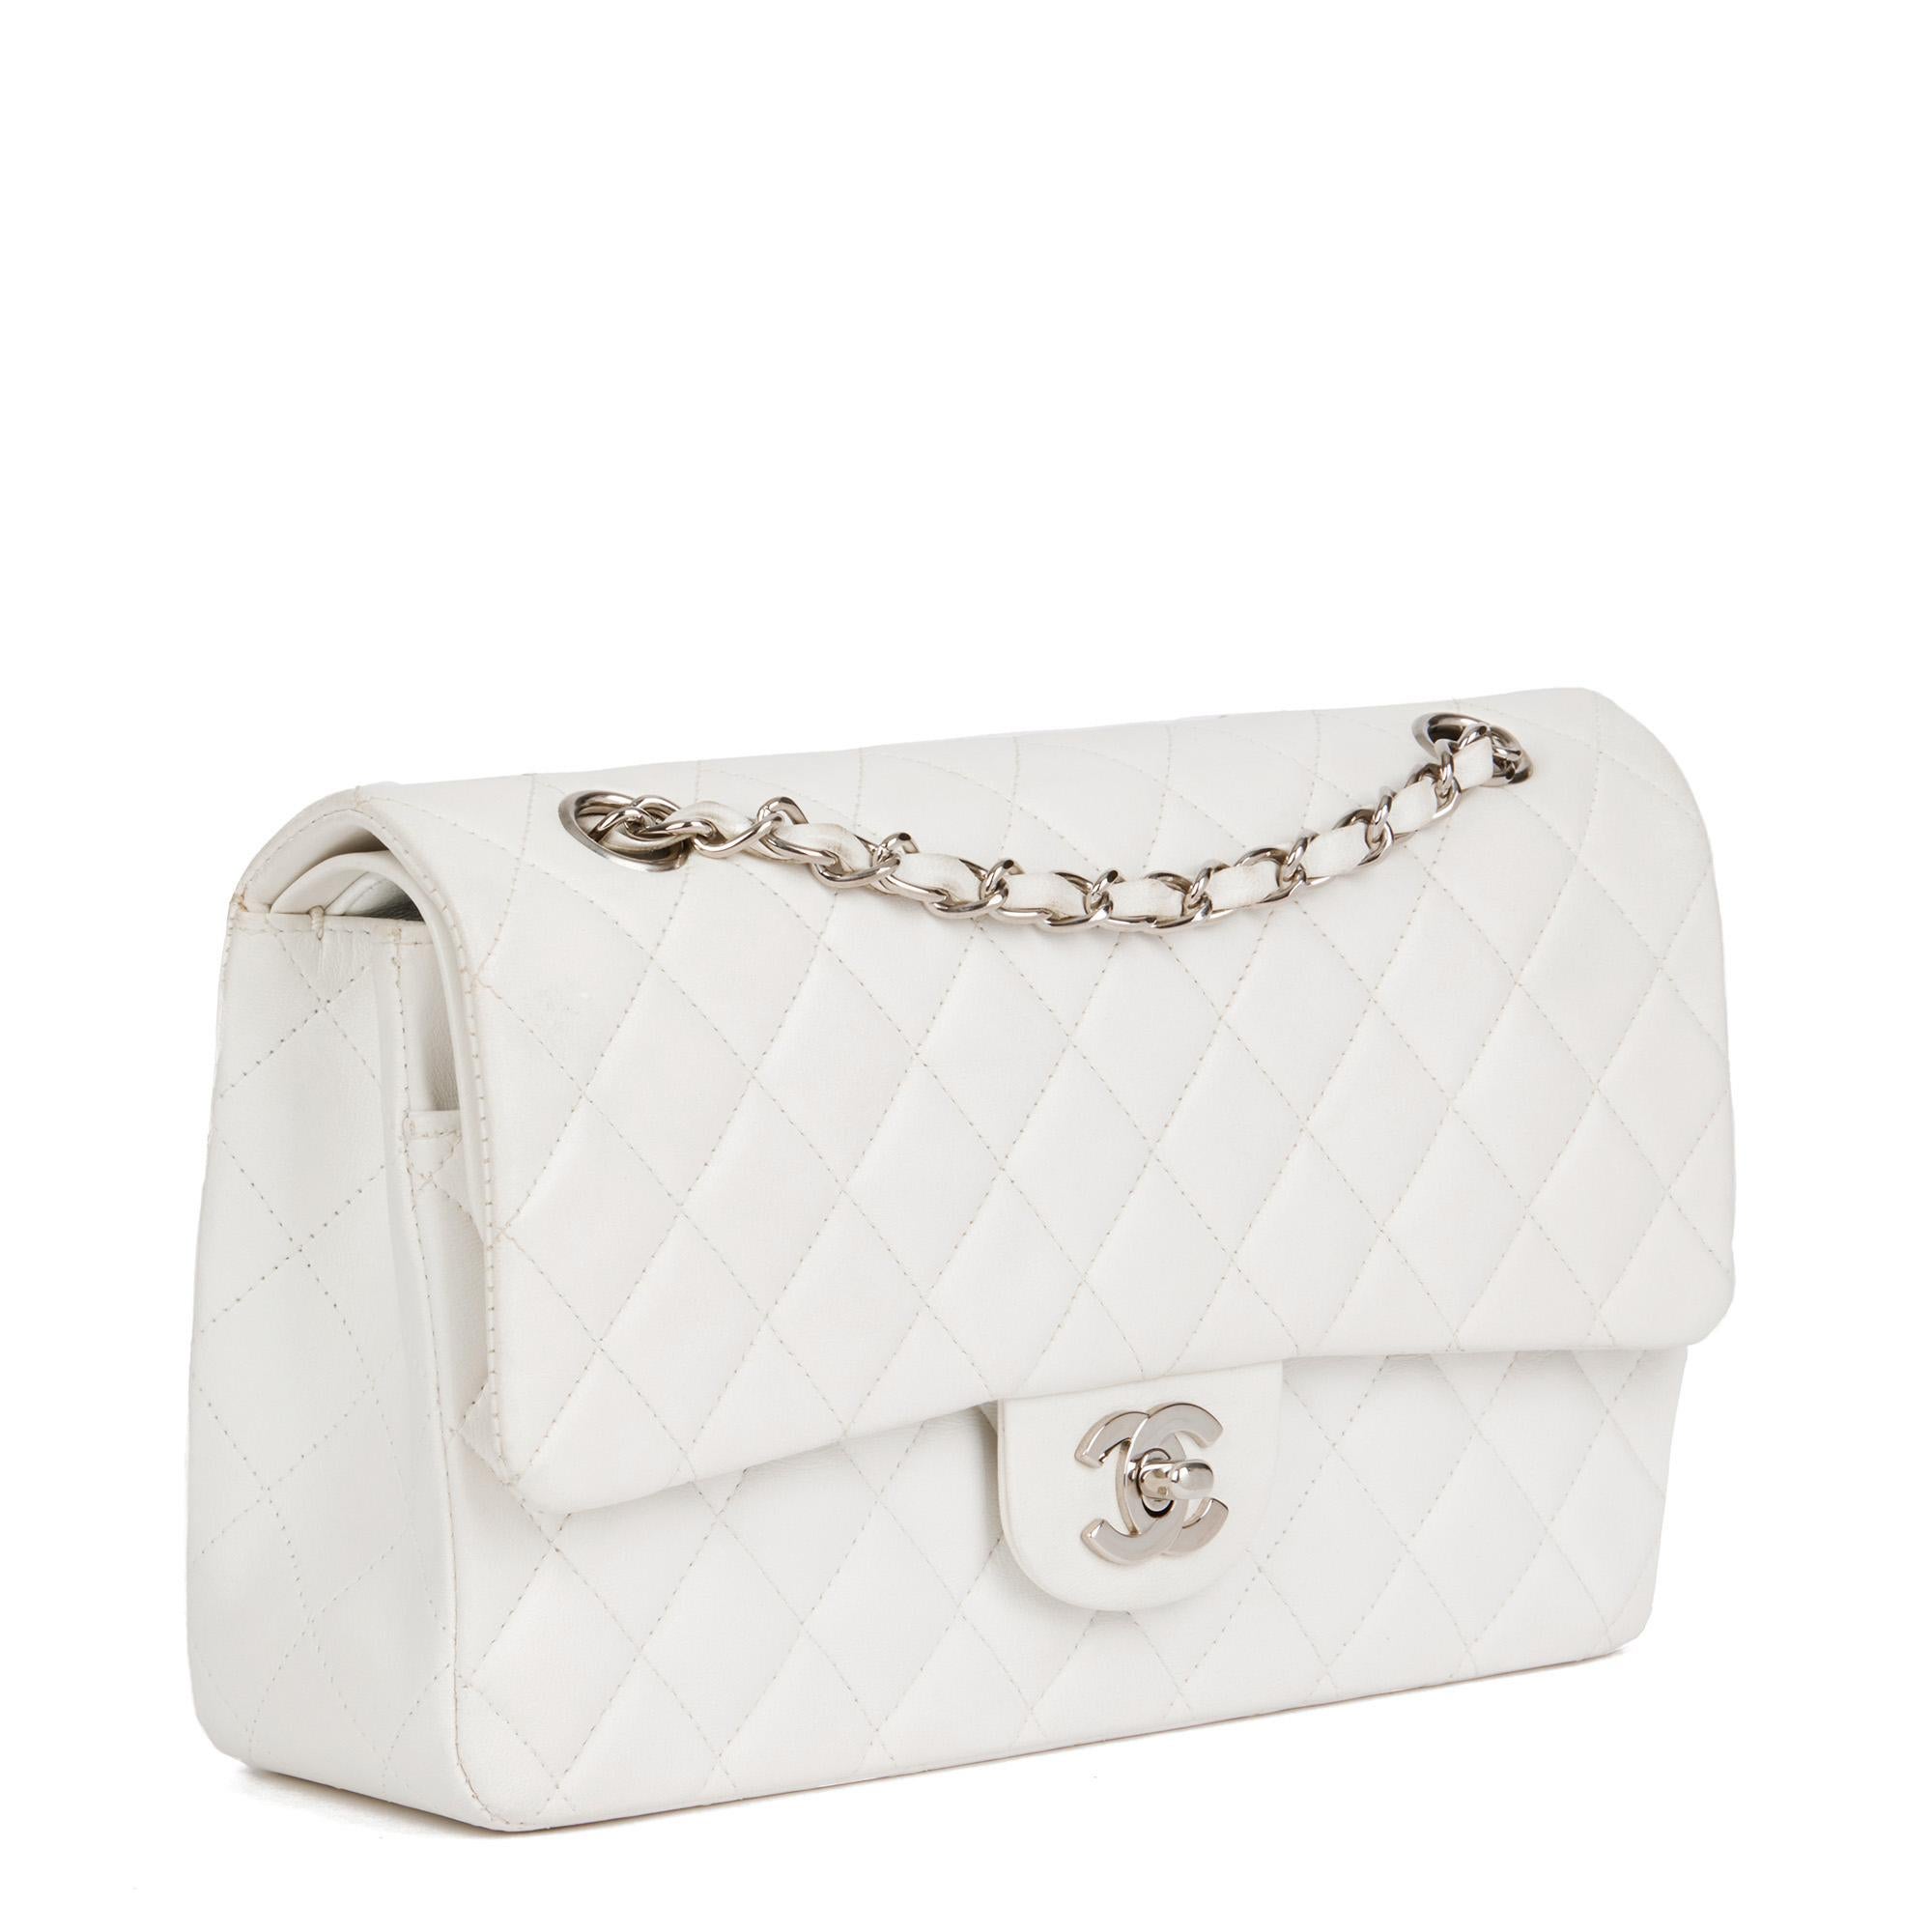 CHANEL
White Quilted Lambskin Vintage Medium Classic Double Flap Bag 

Serial Number: 5882551
Age (Circa): 1999
Accompanied By: Authenticity Card
Authenticity Details: Authenticity Card, Serial Sticker (Made in France)
Gender: Ladies
Type: